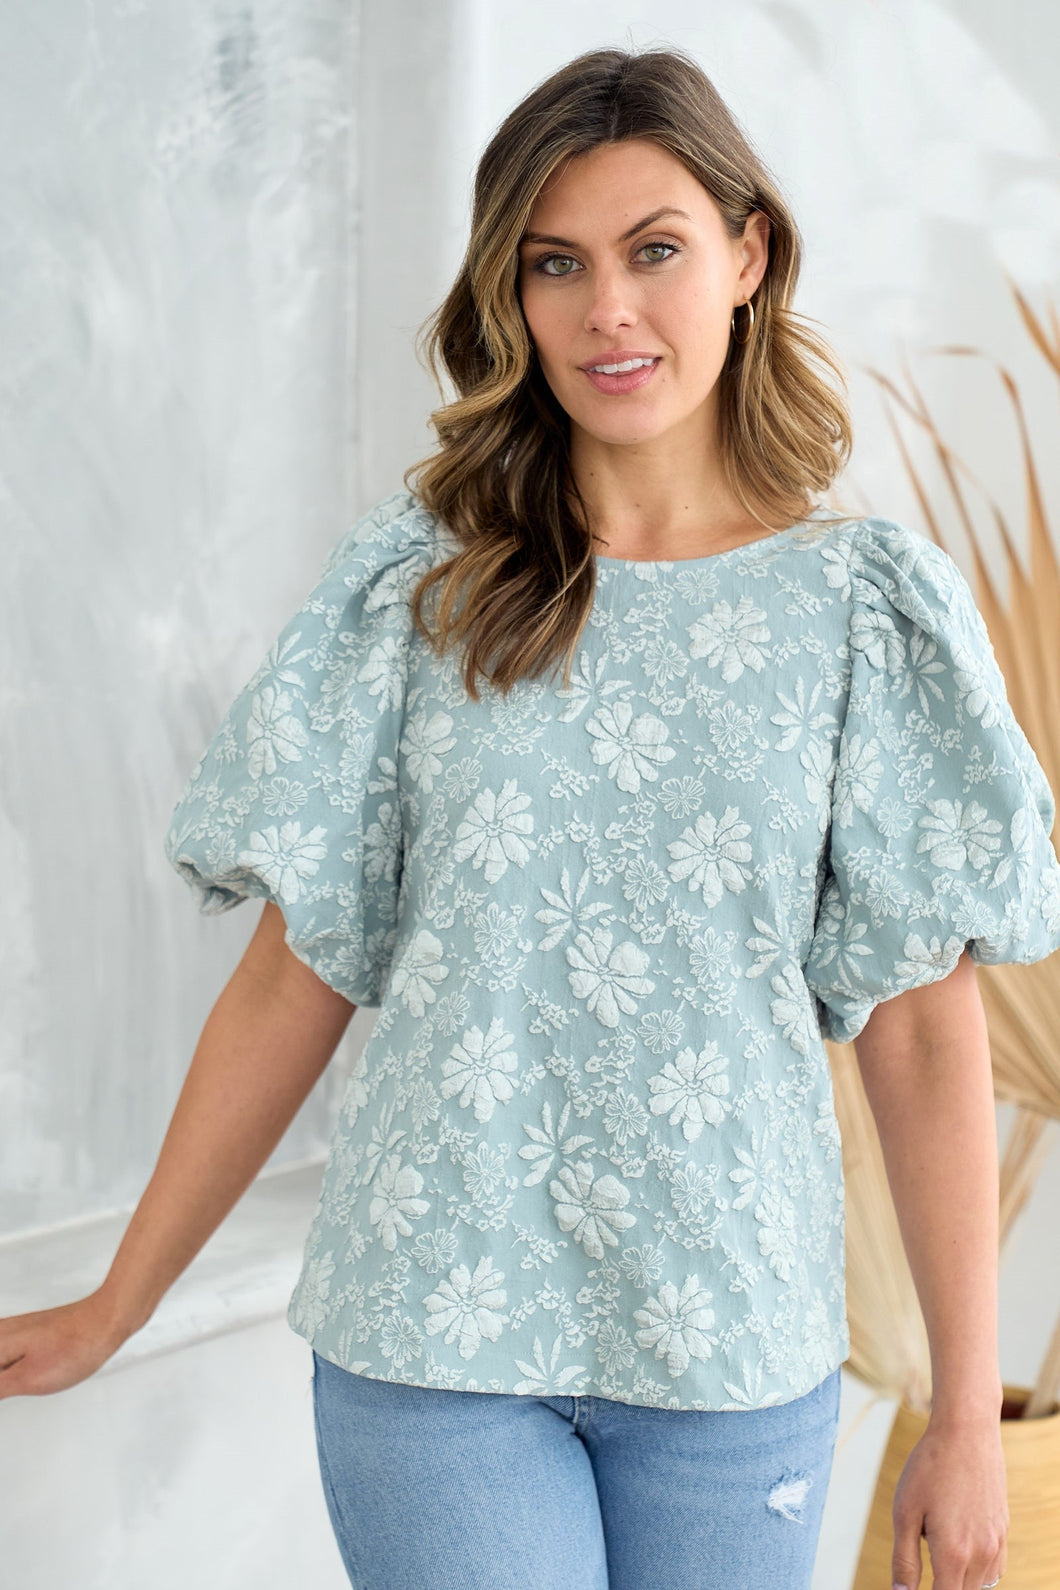 Hailey & Co Textured Floral Print Top in Sage